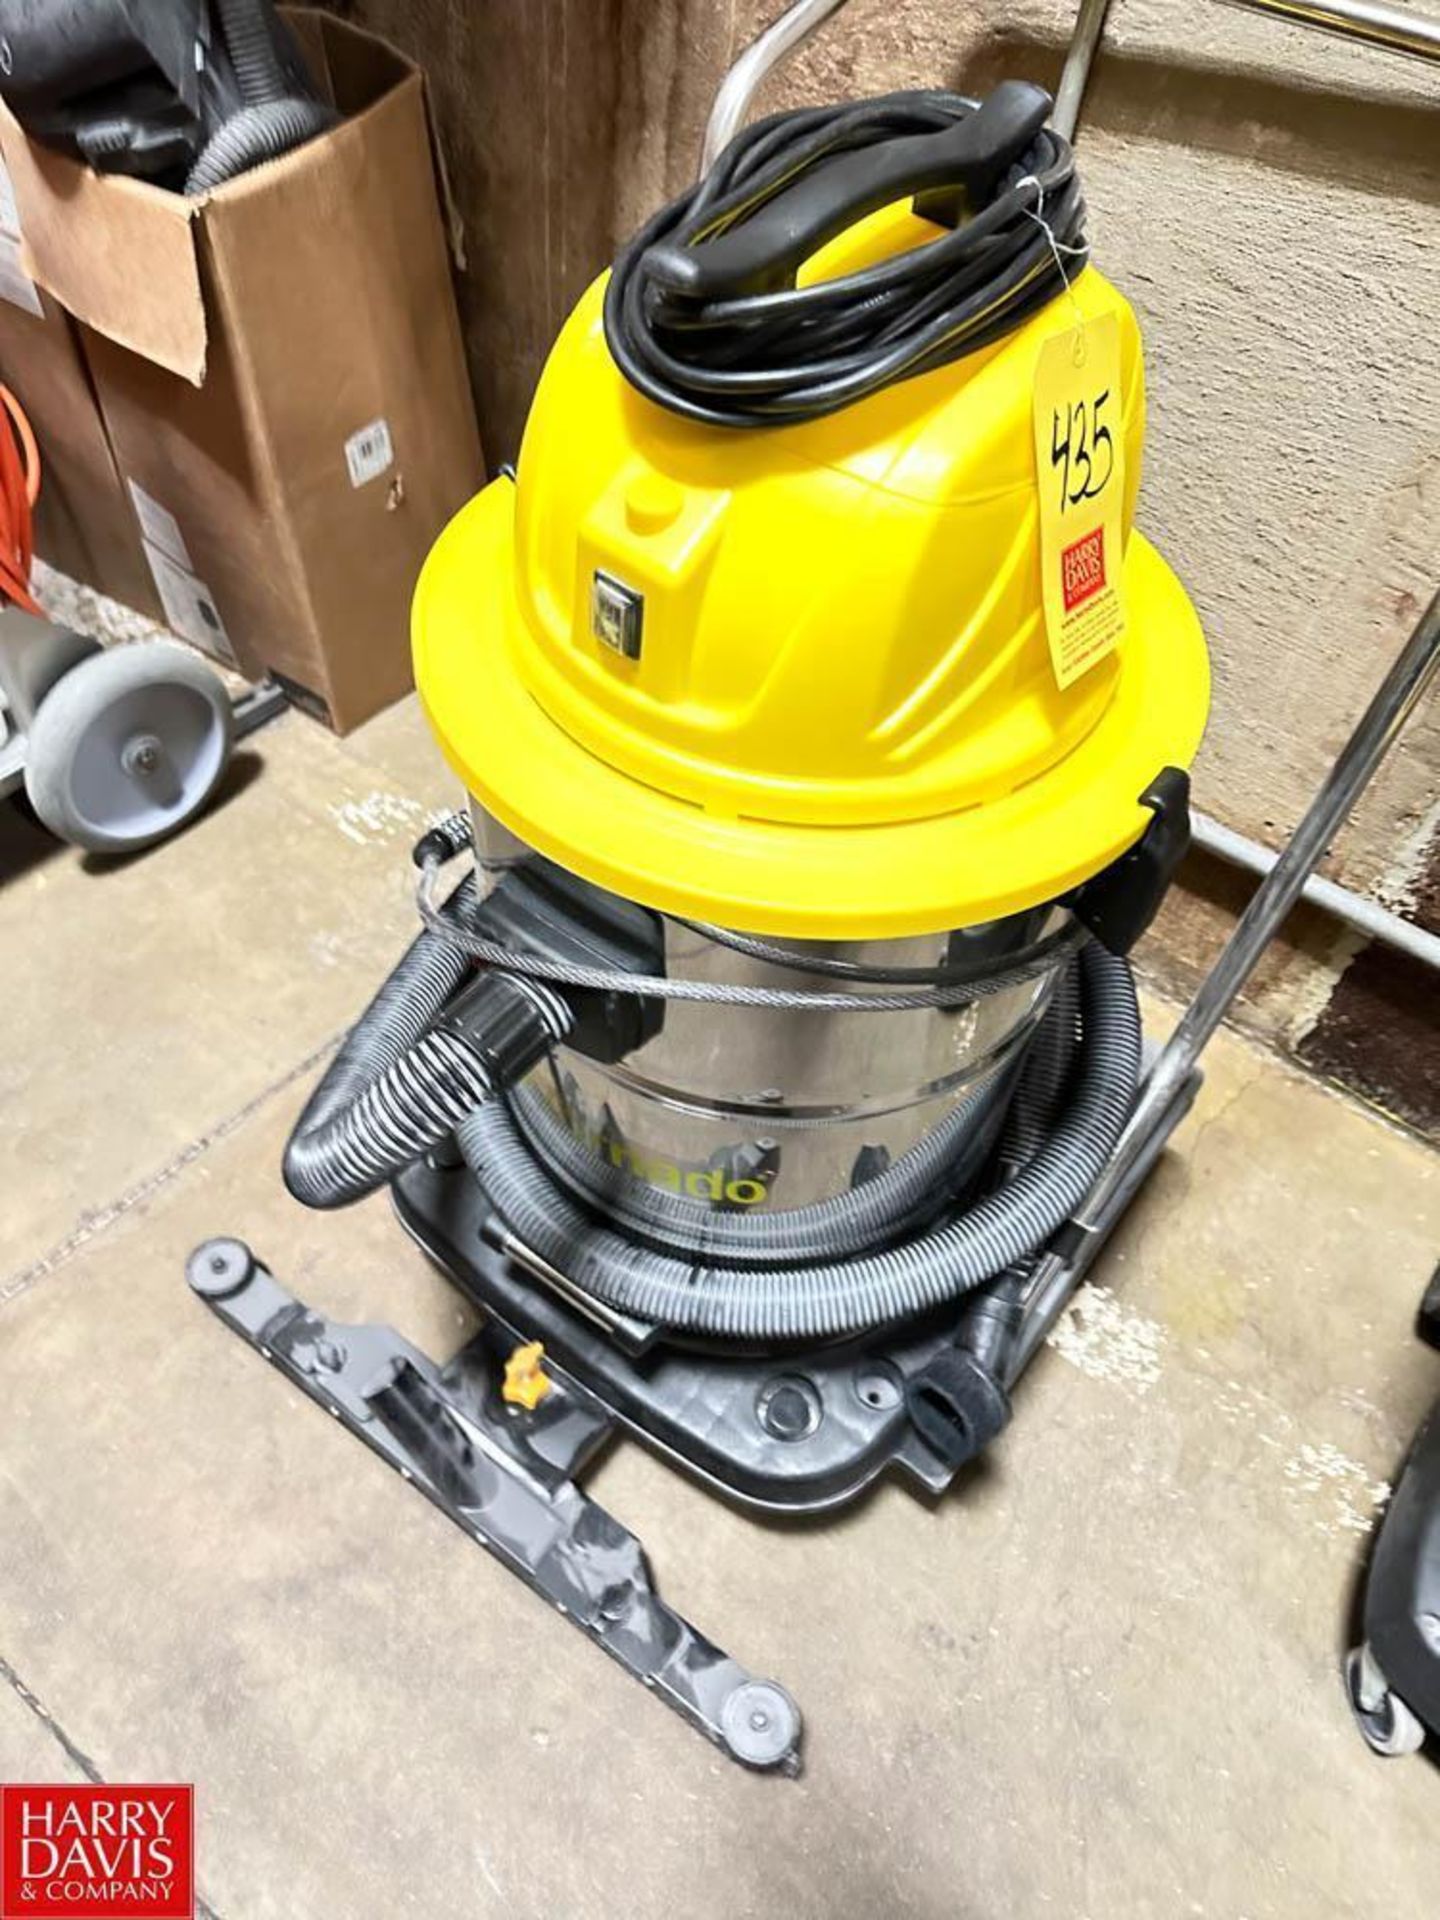 Tornado Wet/Dry Vacuum with Scrubber and Attachments - Rigging Fee: $35